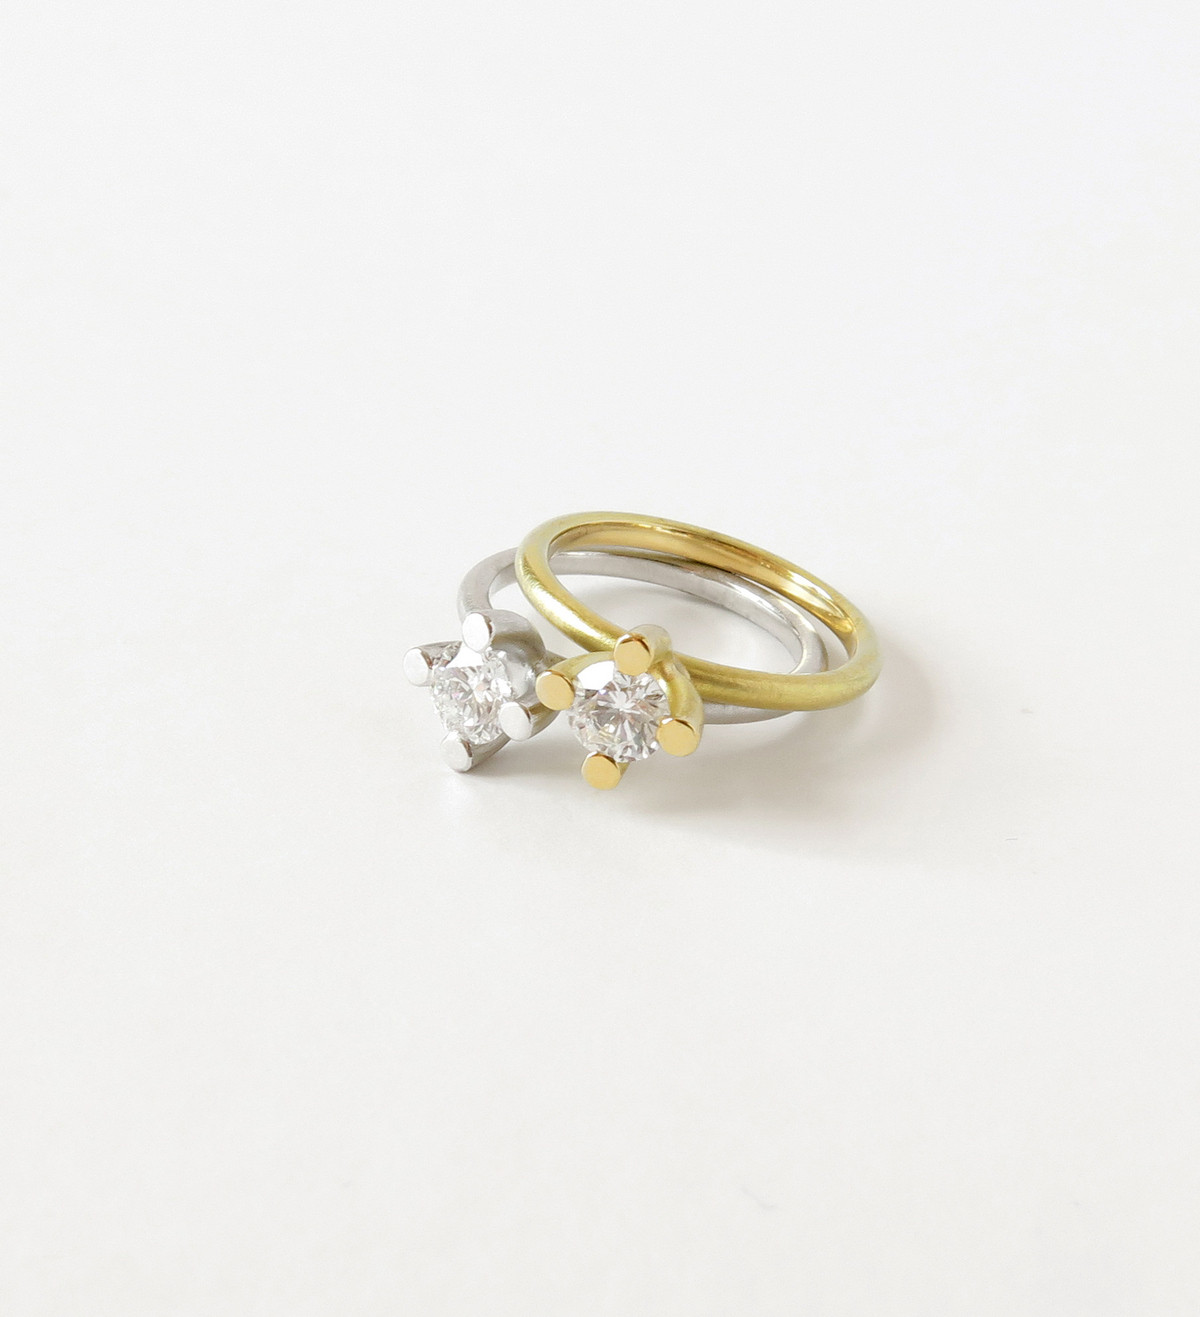 18k gold ring with diamond 0,31ct VS1 D